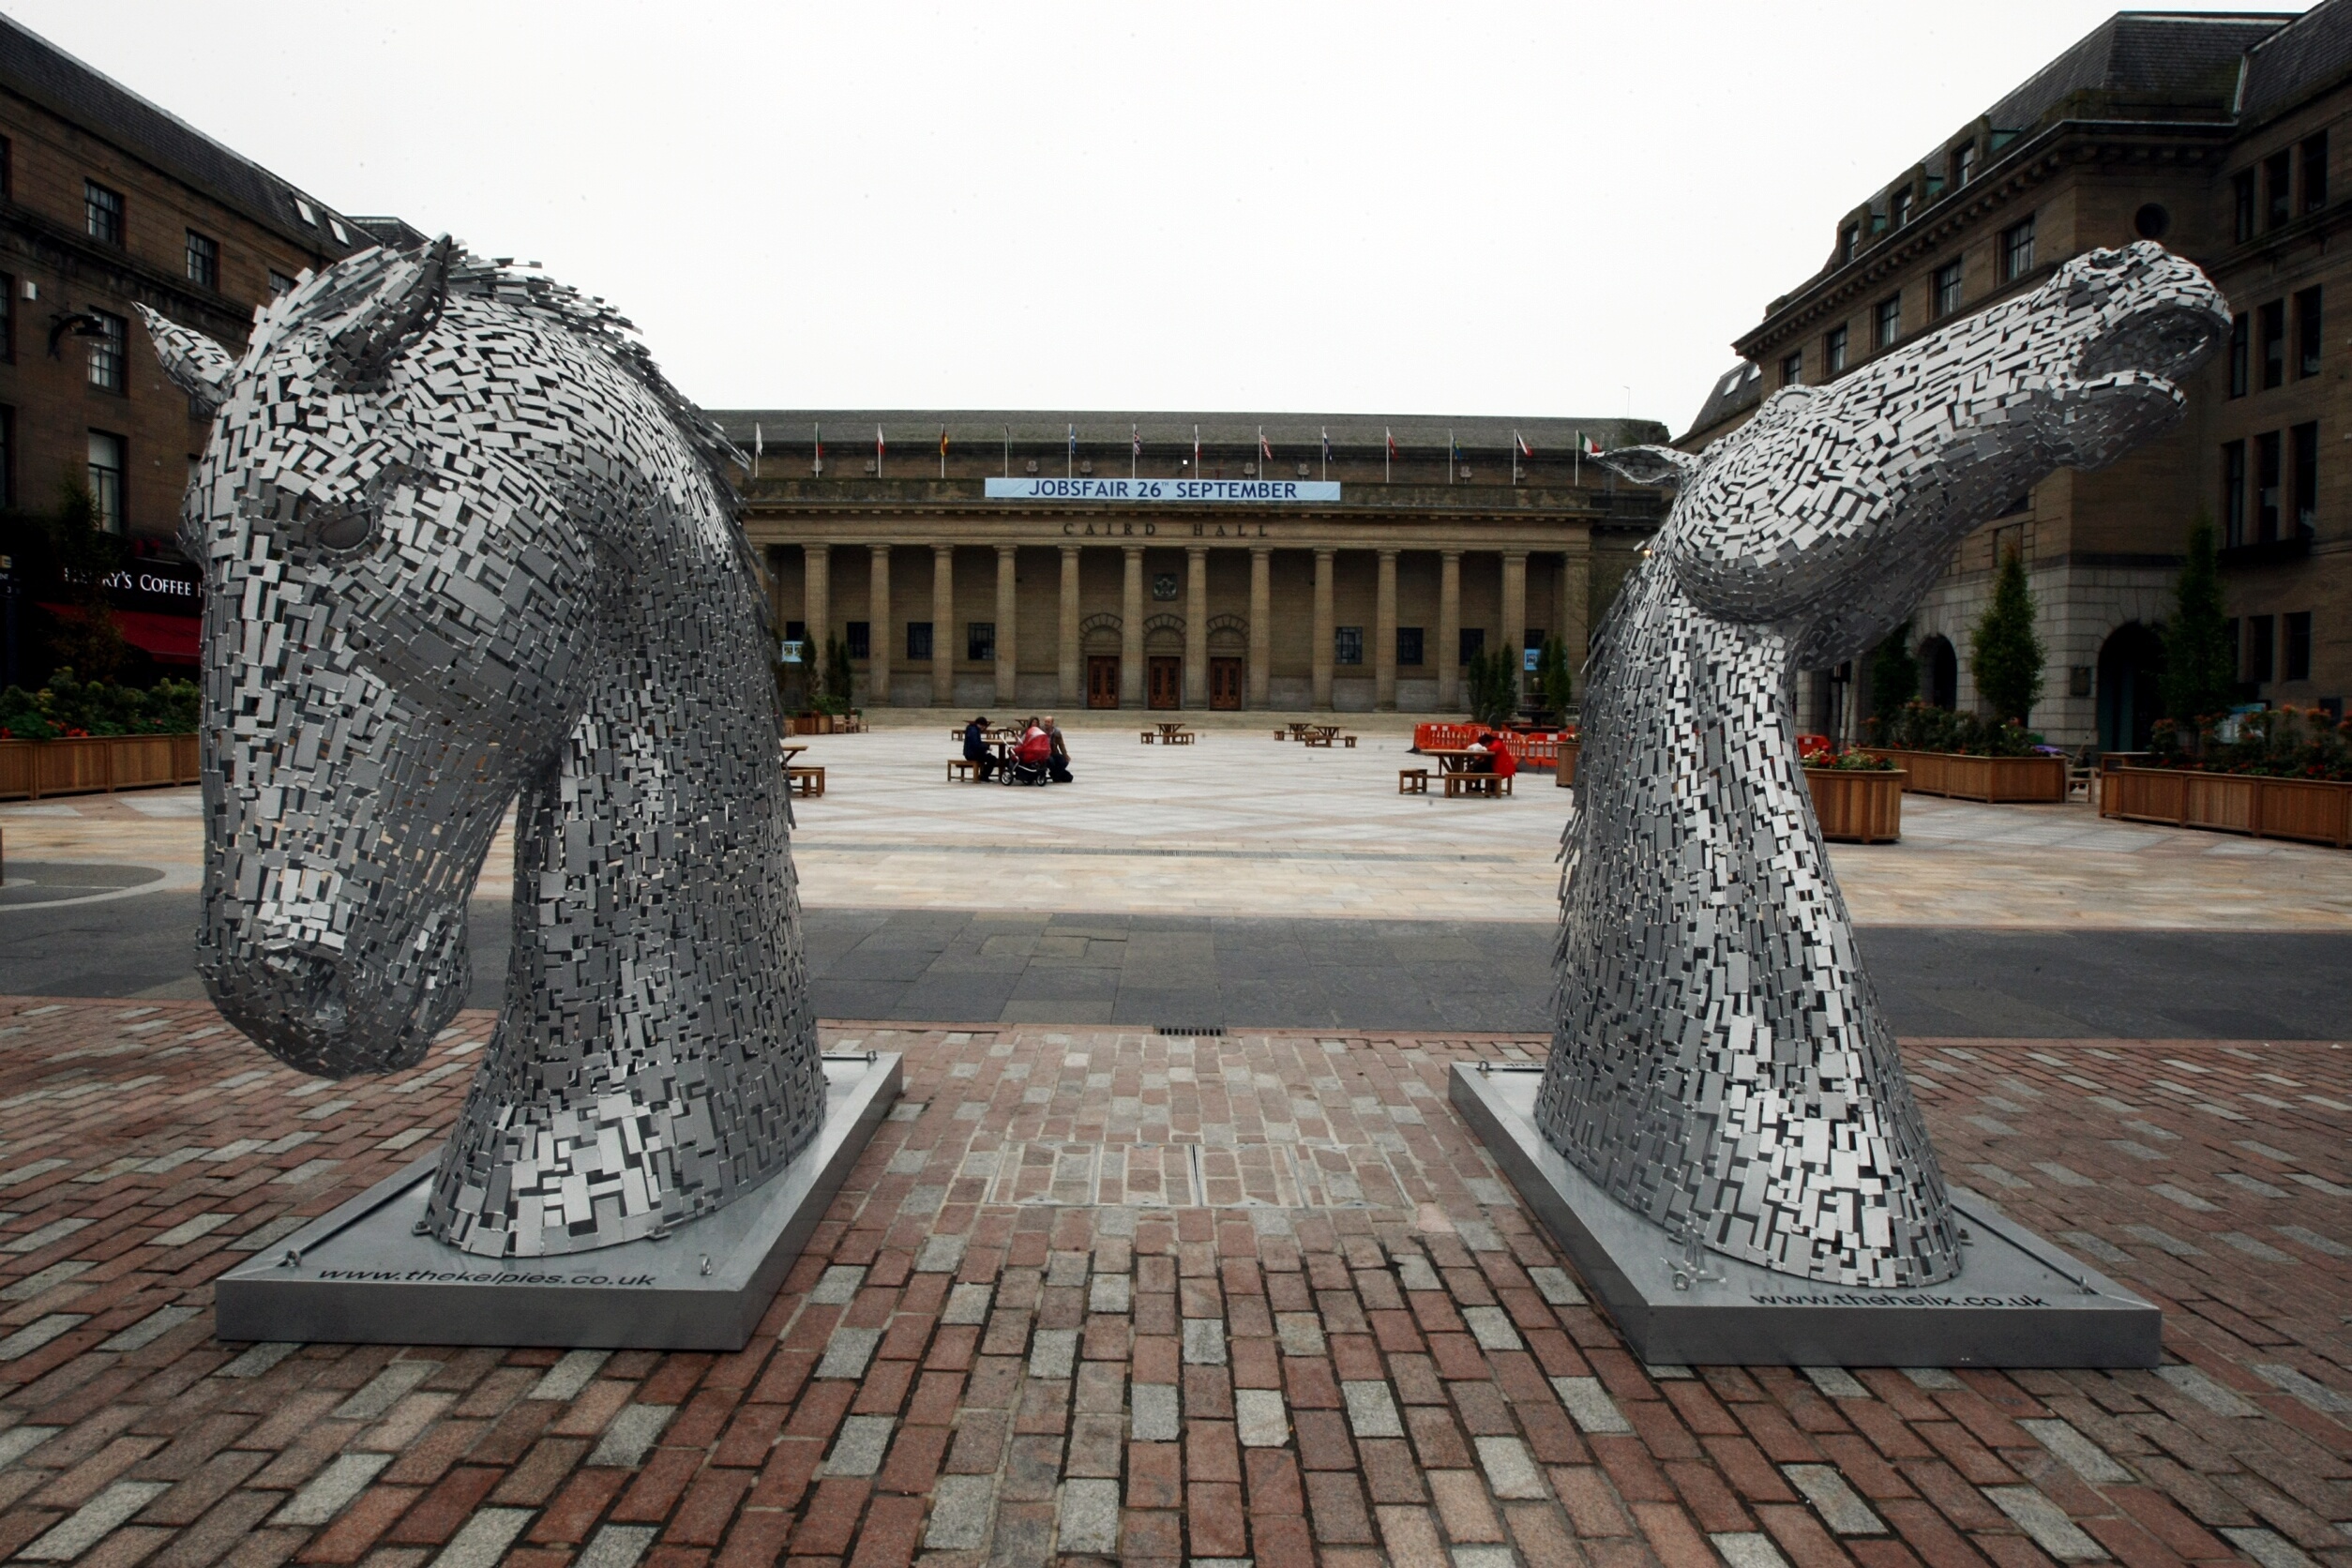 The Kelpie maquettes visited Dundee in September 2013.